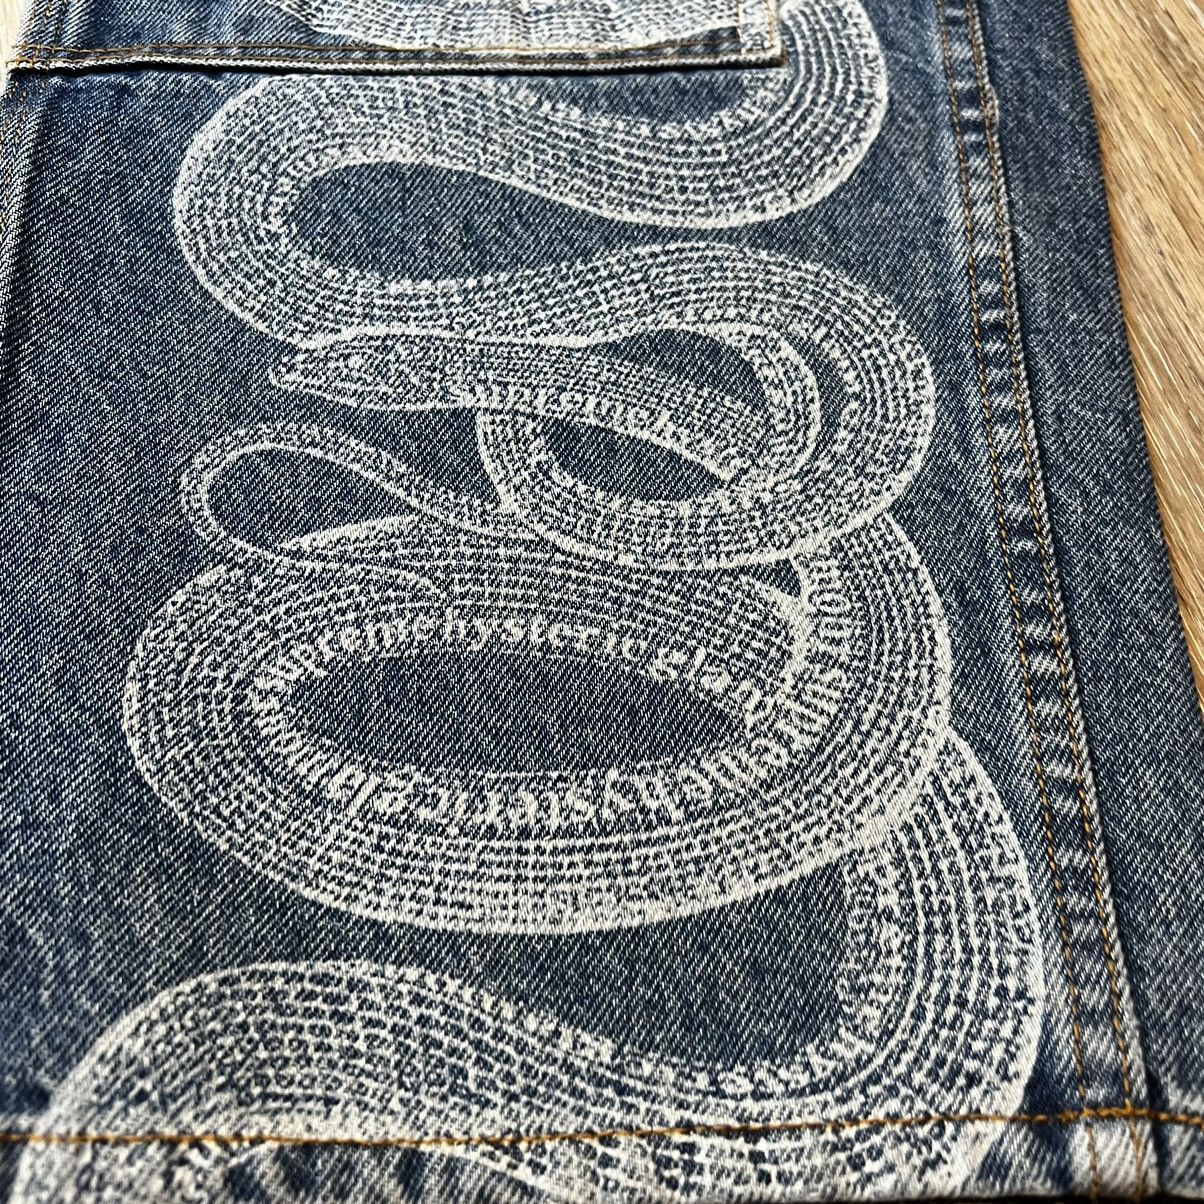 Supreme Supreme Hysteric Glamour Snake Double Knee Denim Painter | Grailed